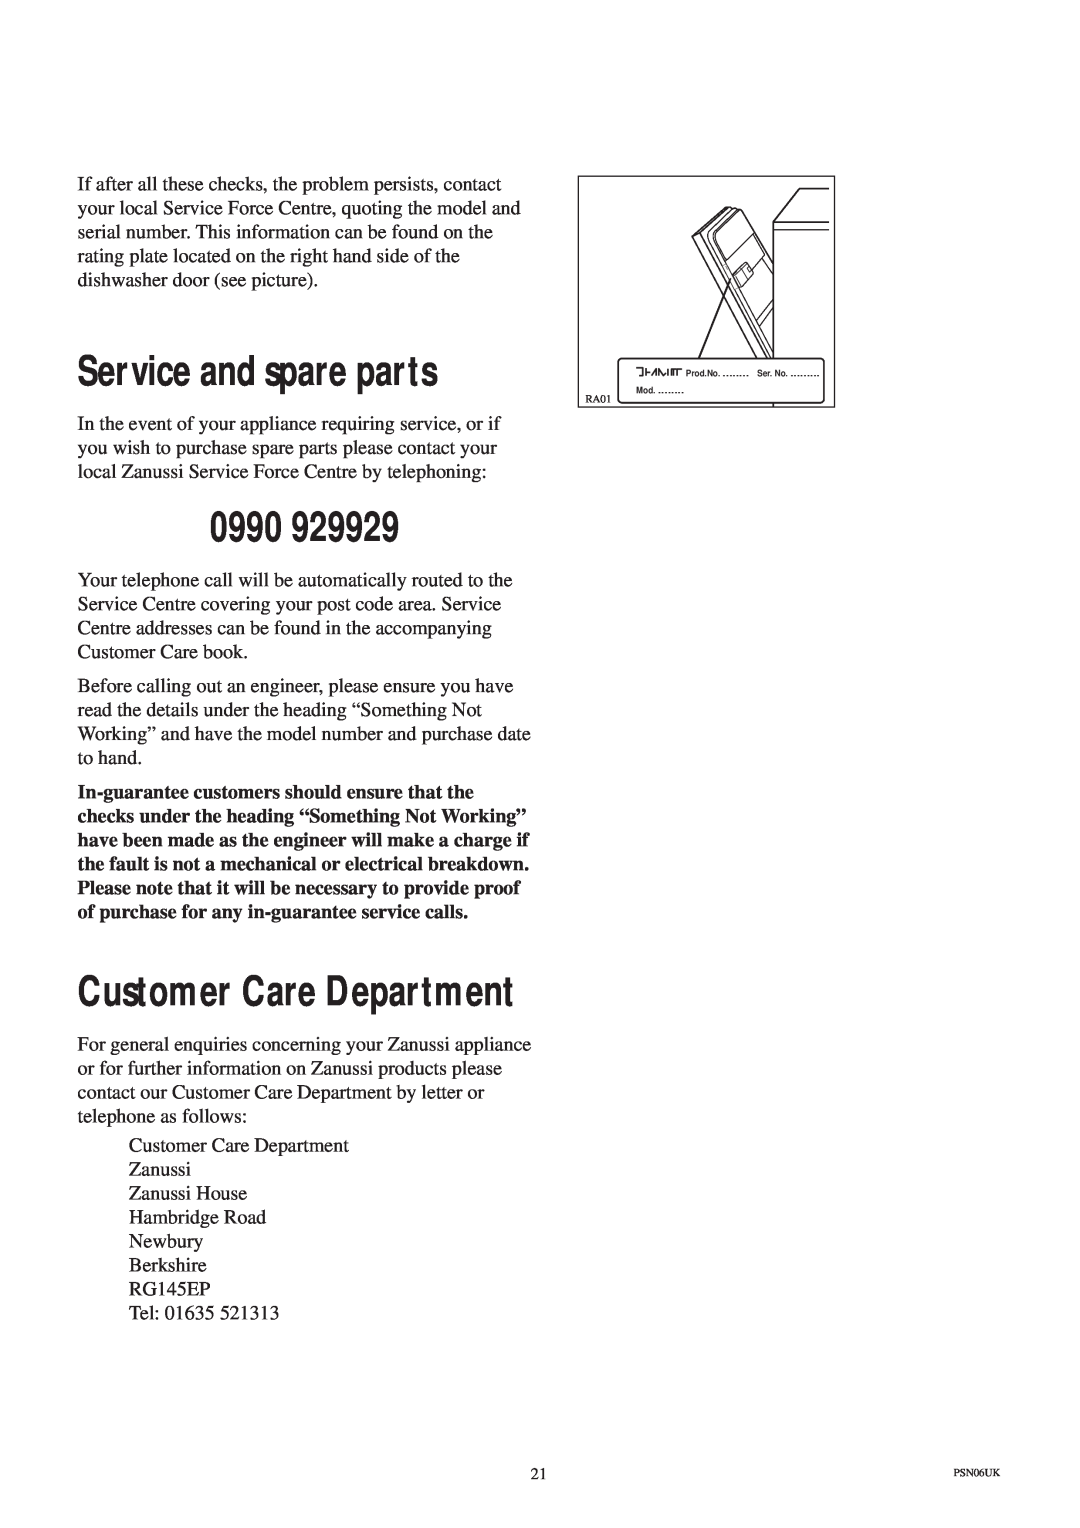 Zanussi ZT 685 manual Service and spare parts, 0990, Customer Care Department 